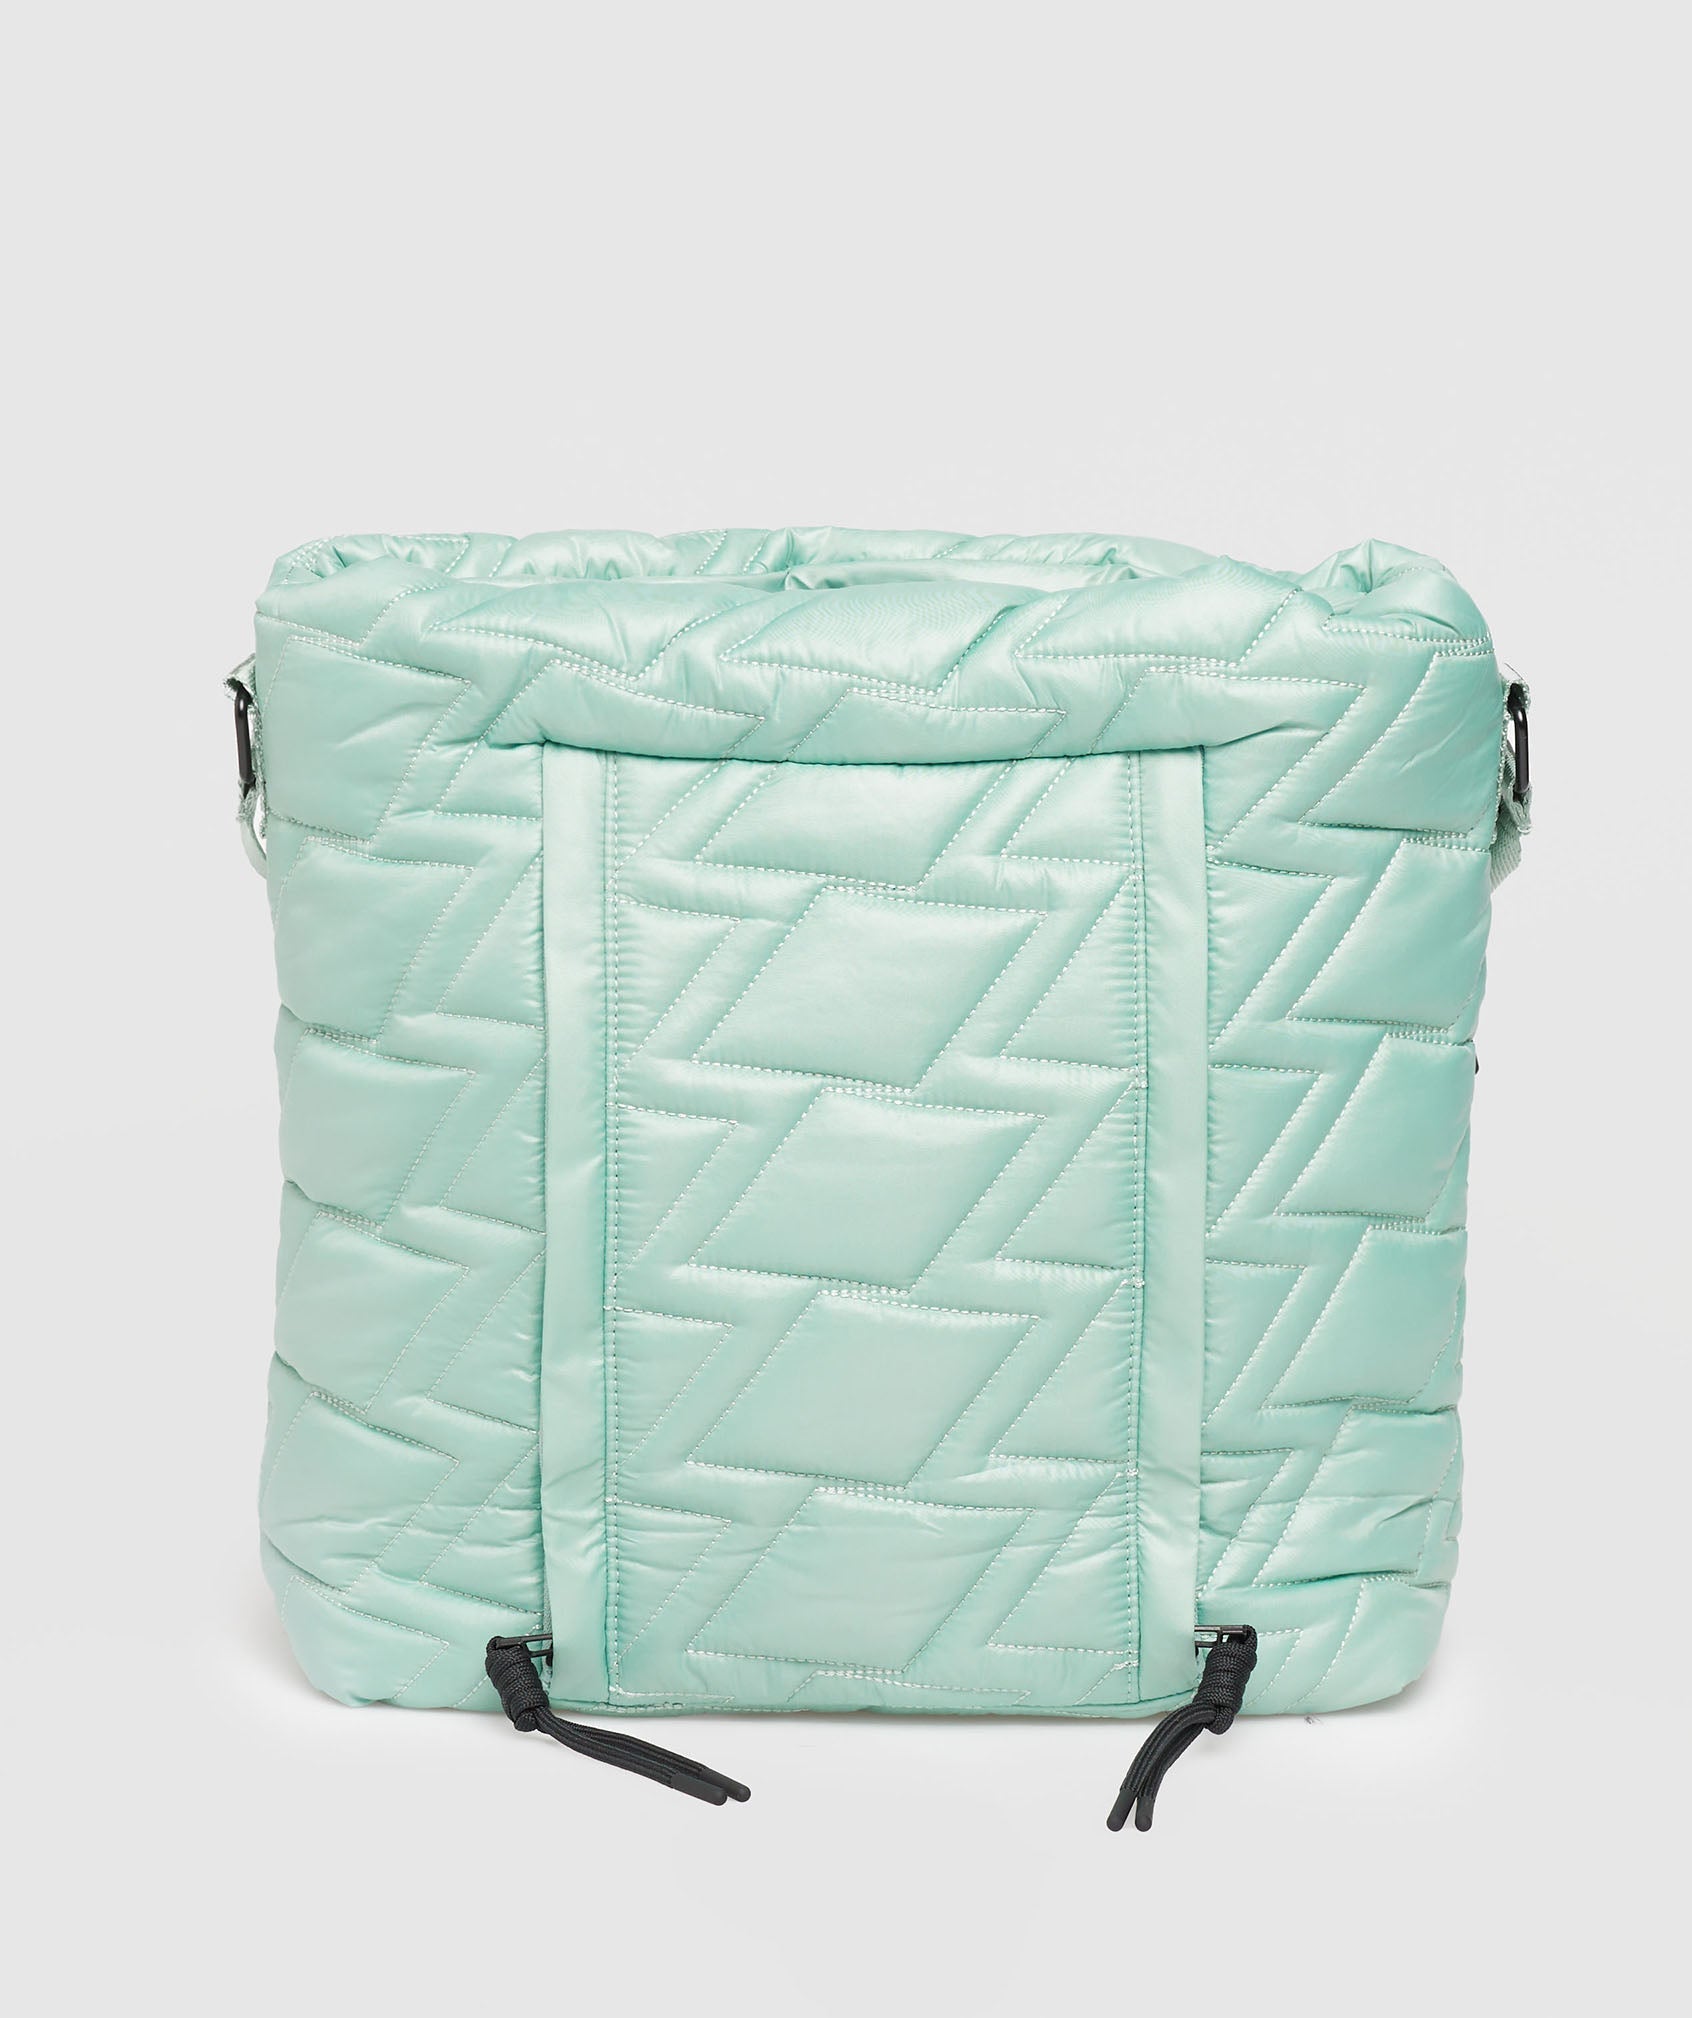 Quilted Yoga Tote in Frost Teal - view 3